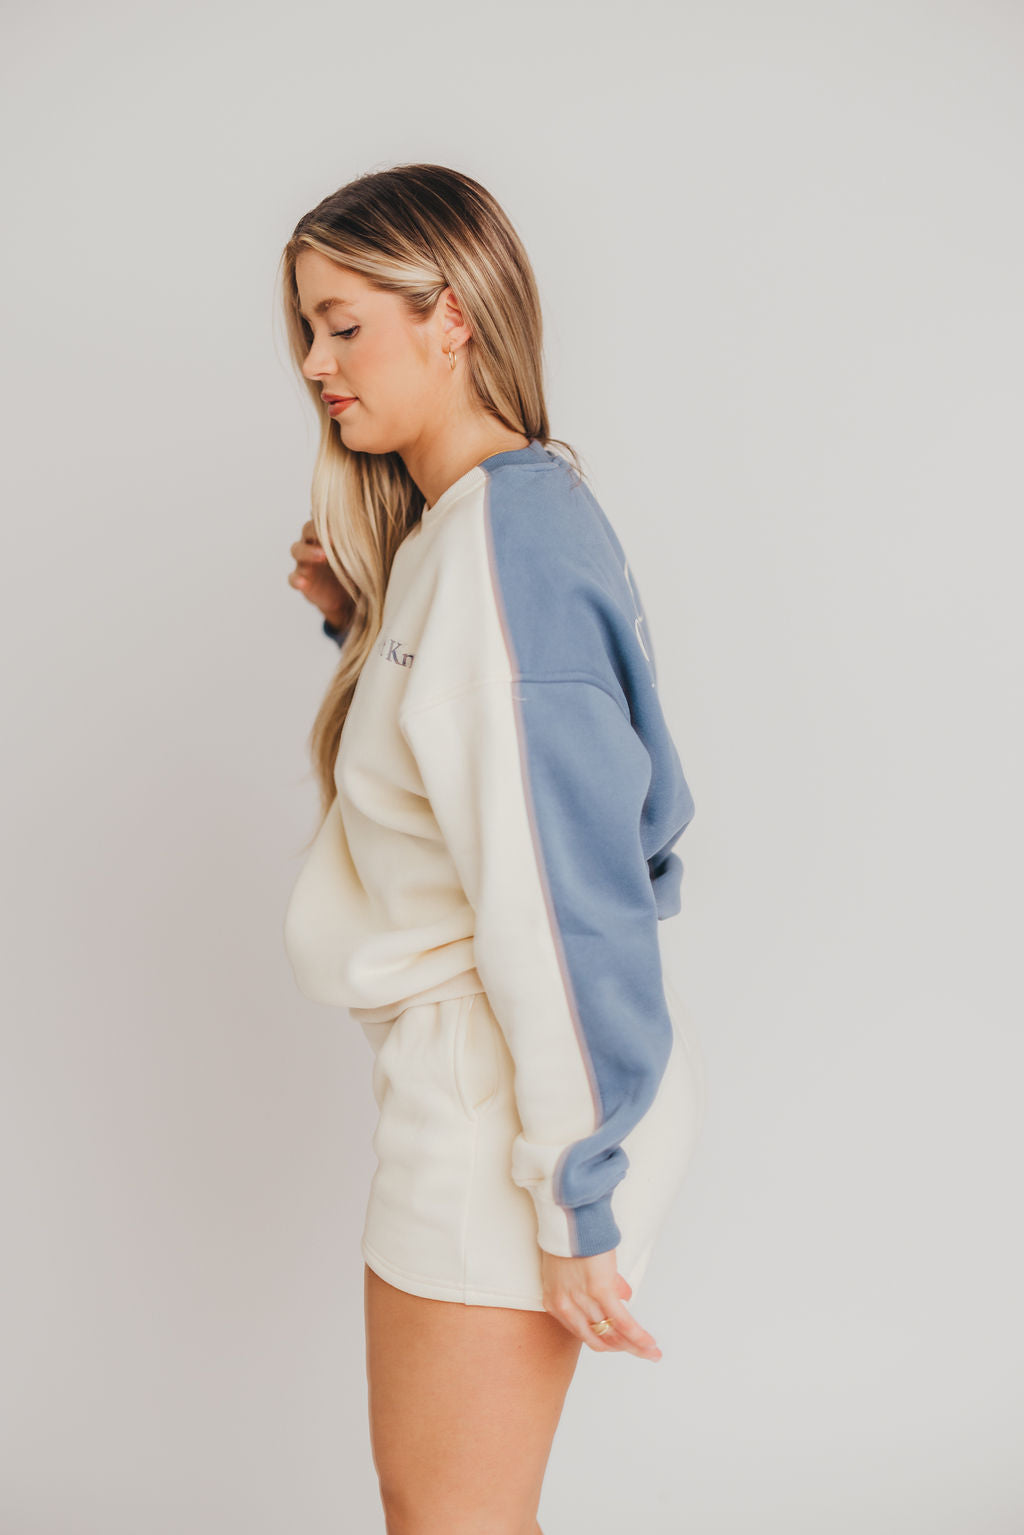 Blythe "Don't Know, Don't Care" Pullover in Cream/Vintage Blue